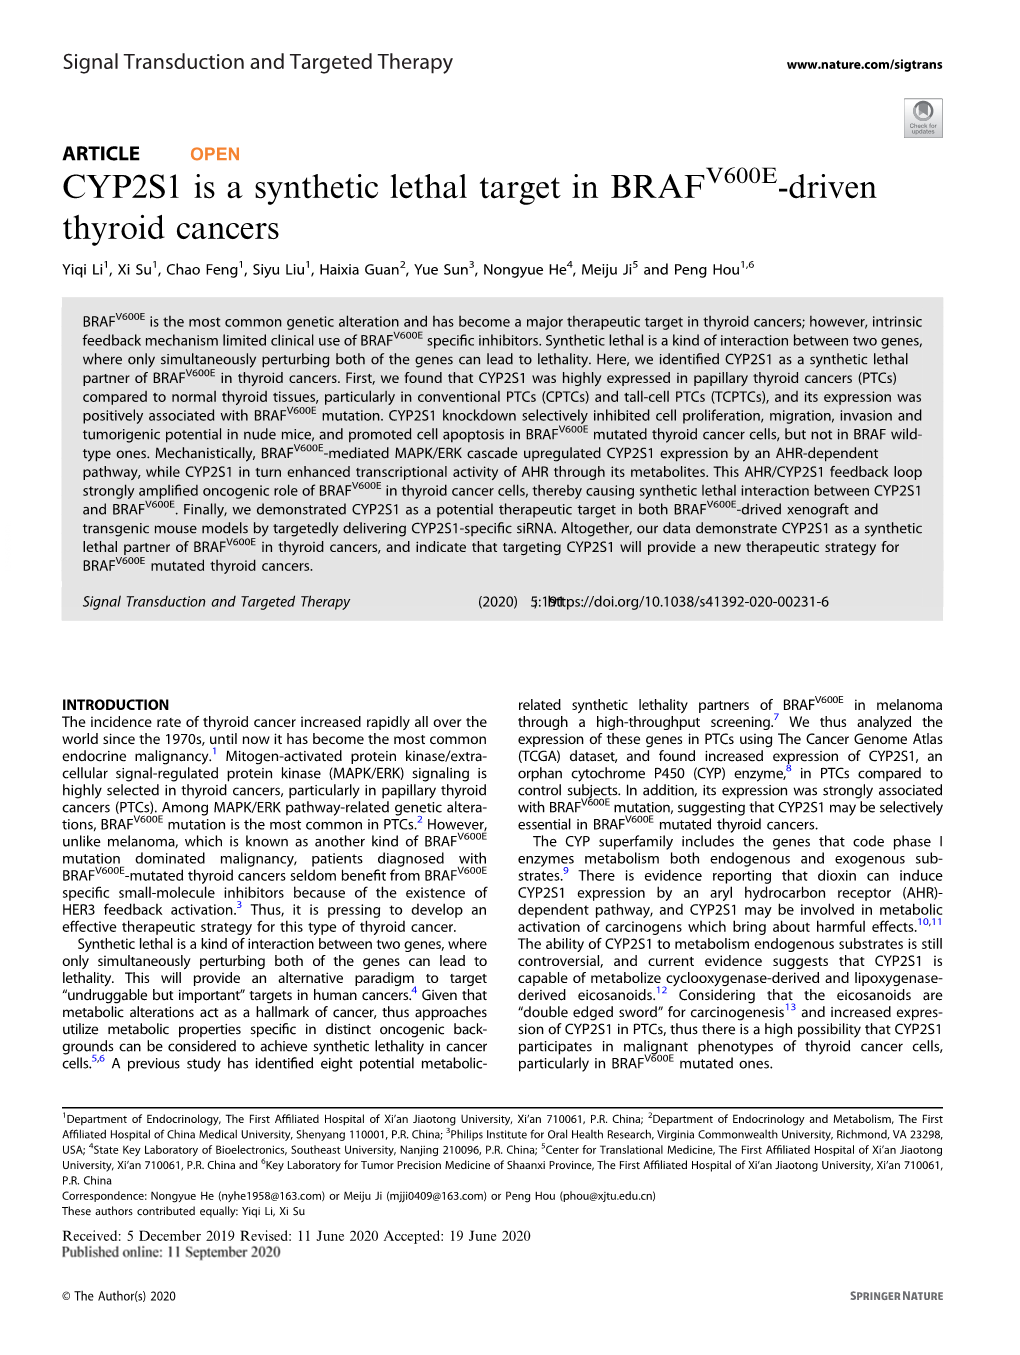 CYP2S1 Is a Synthetic Lethal Target in BRAFV600E-Driven Thyroid Cancers